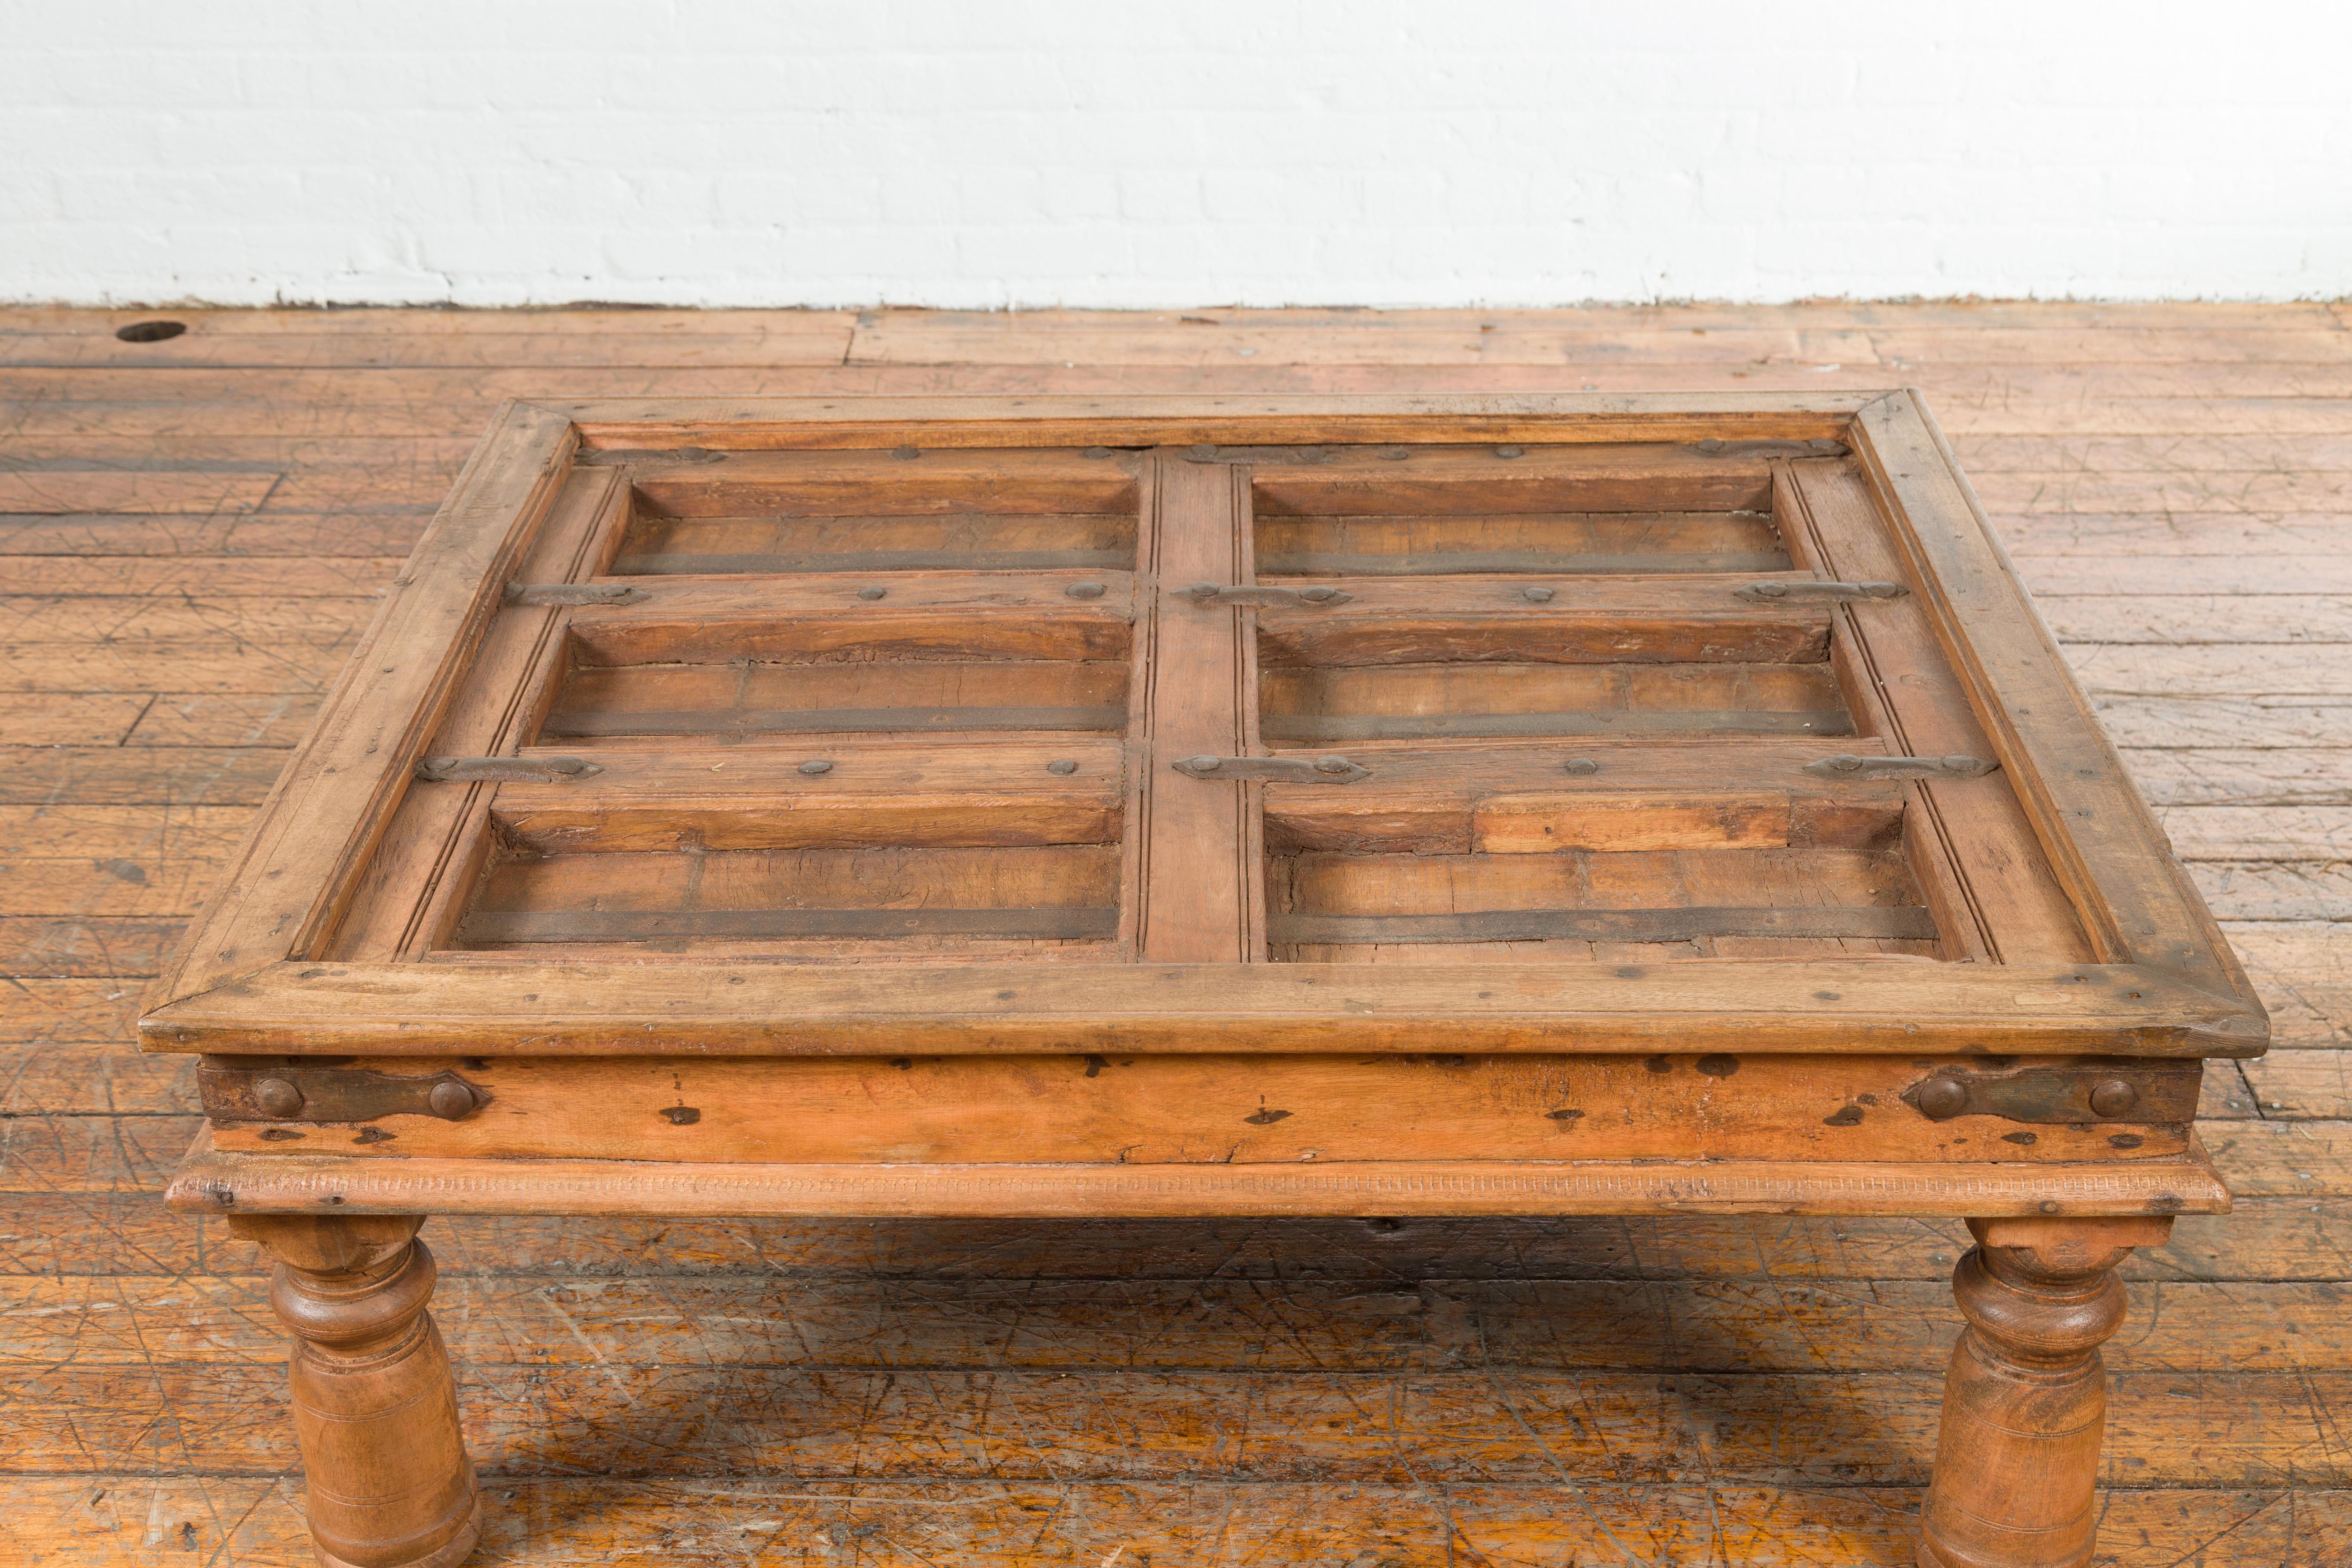 Metal Indian 19th Century Sheesham Wood Courtyard Door Redesigned as a Coffee Table For Sale